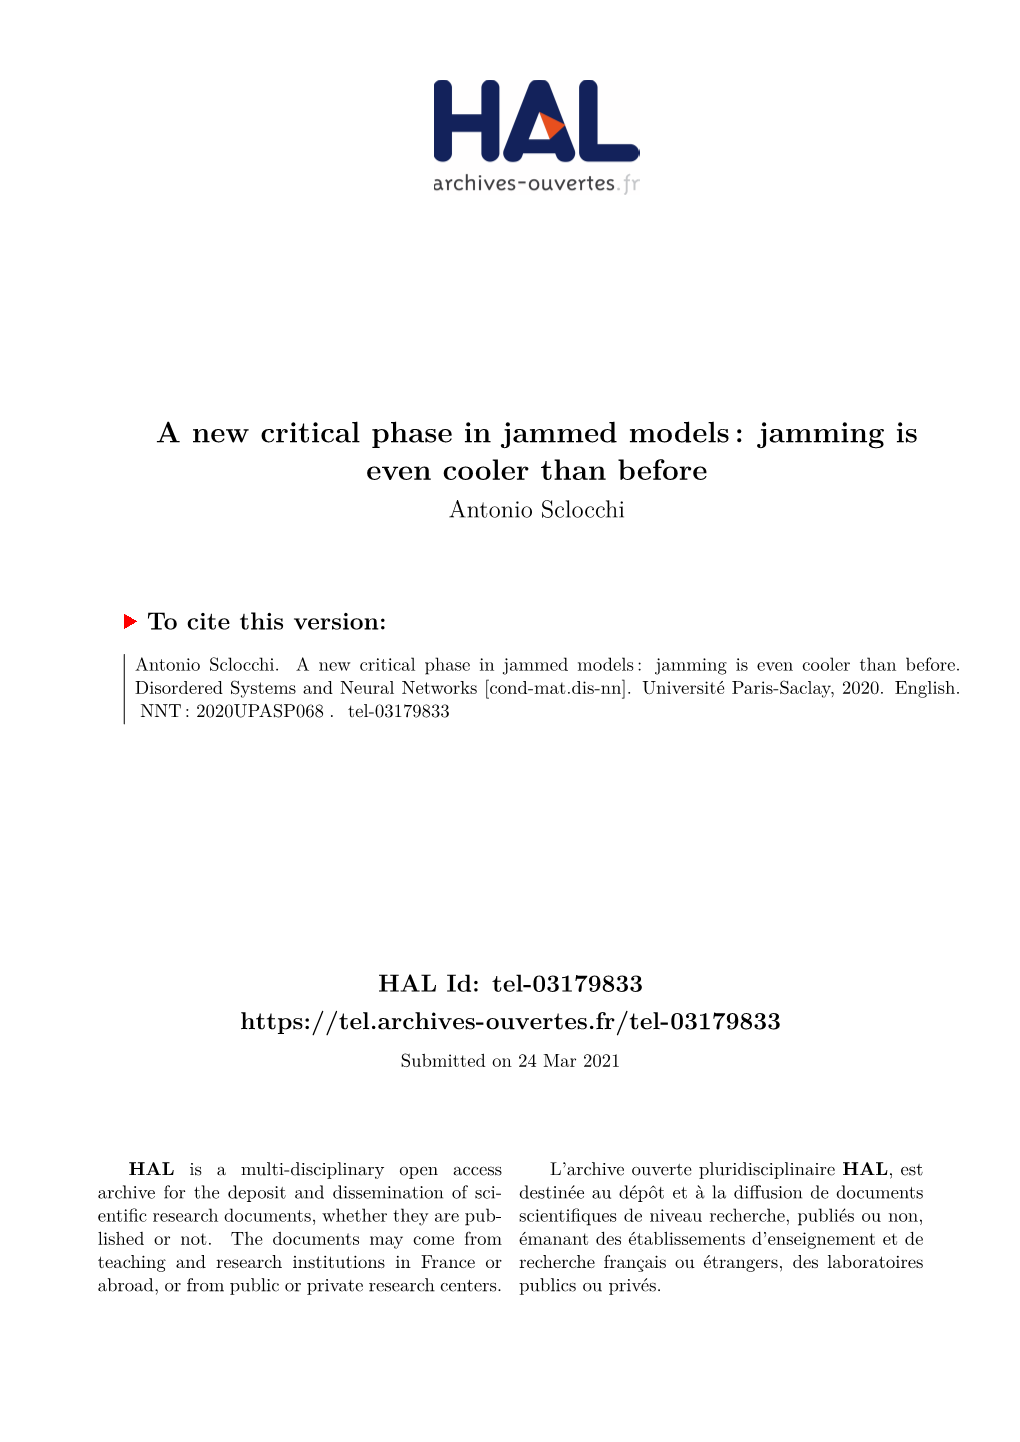 A New Critical Phase in Jammed Models: Jamming Is Even Cooler Than Before